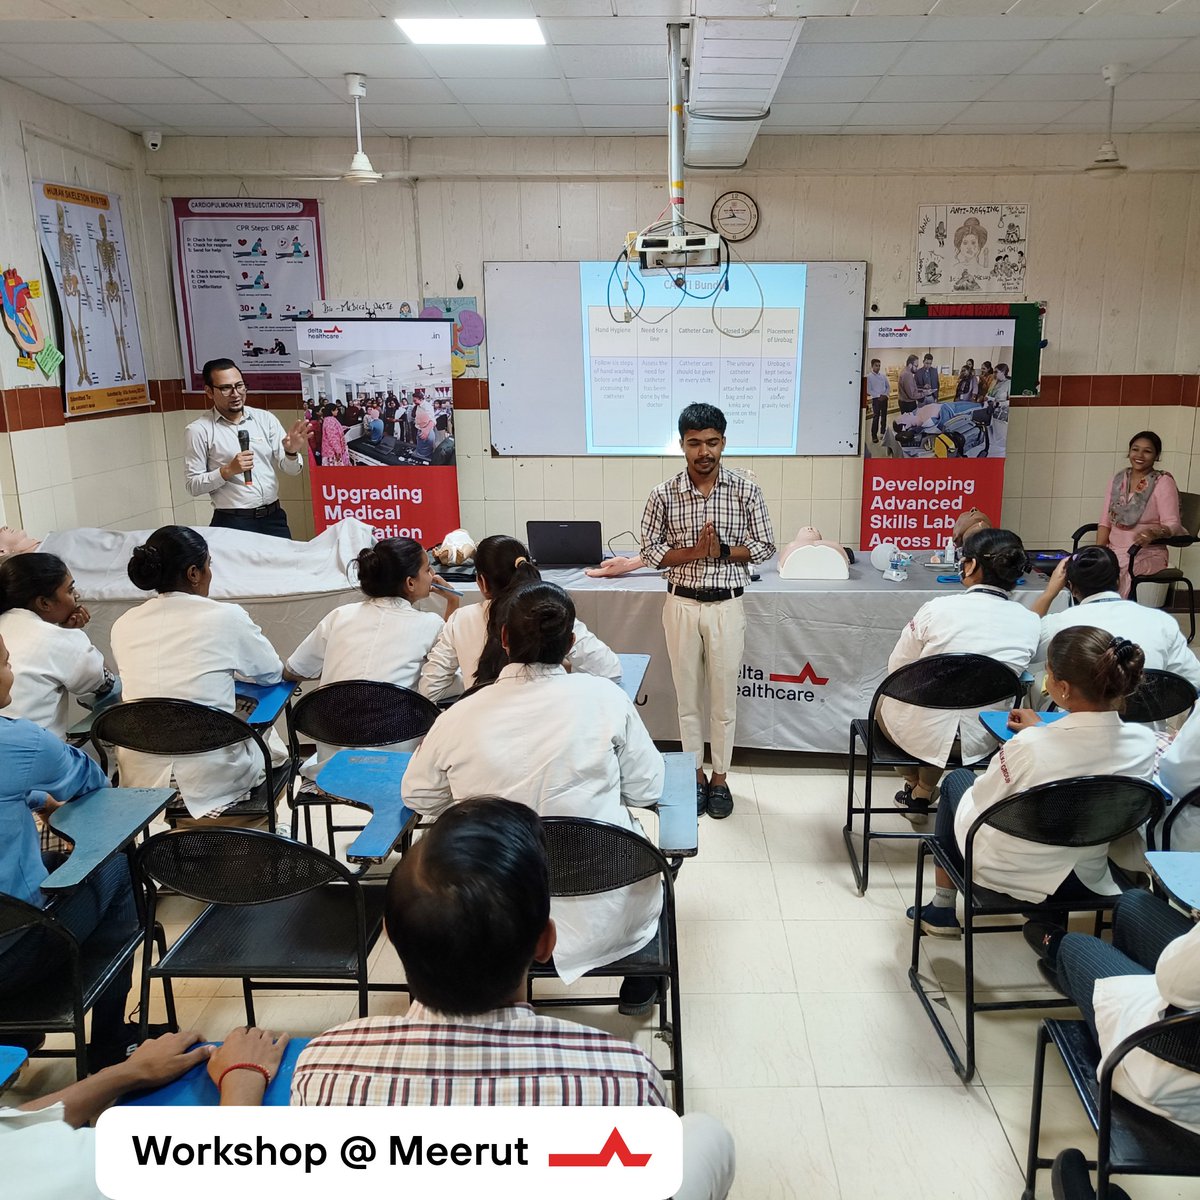 In Meerut
#nursingeducation 

Passionate Trainers | Well-crafted Products
#patientsafety

our flourishing | purpose-driven new initiative
#skillstraining

Would you like to arrange a training session at your institute/hospital ?
Contact our dynamic 
#team